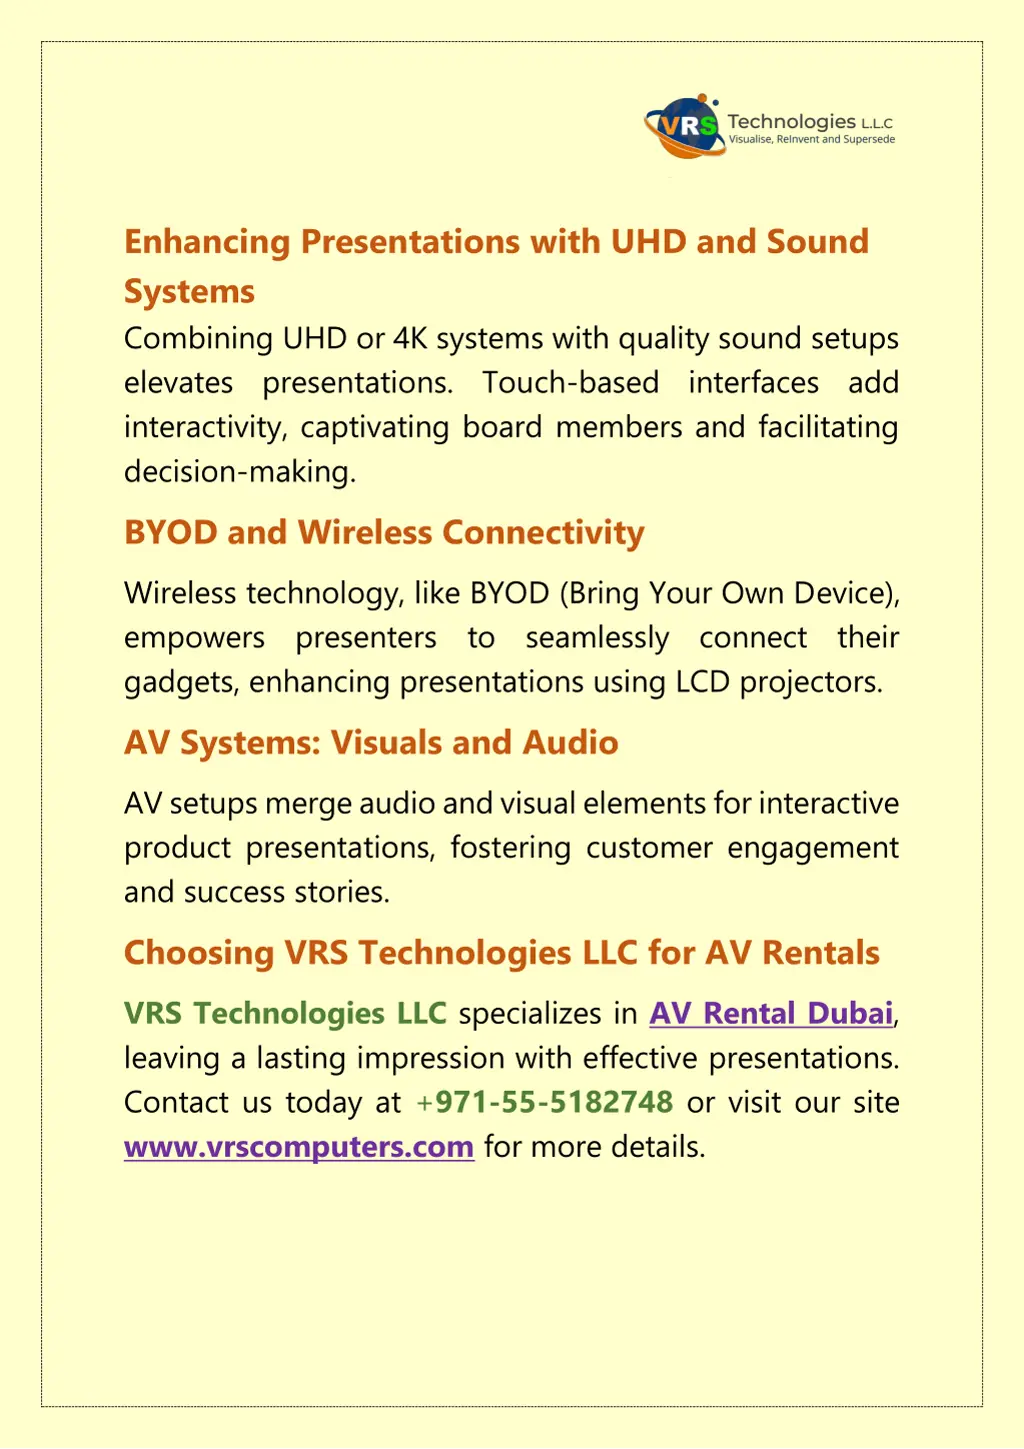 enhancing presentations with uhd and sound